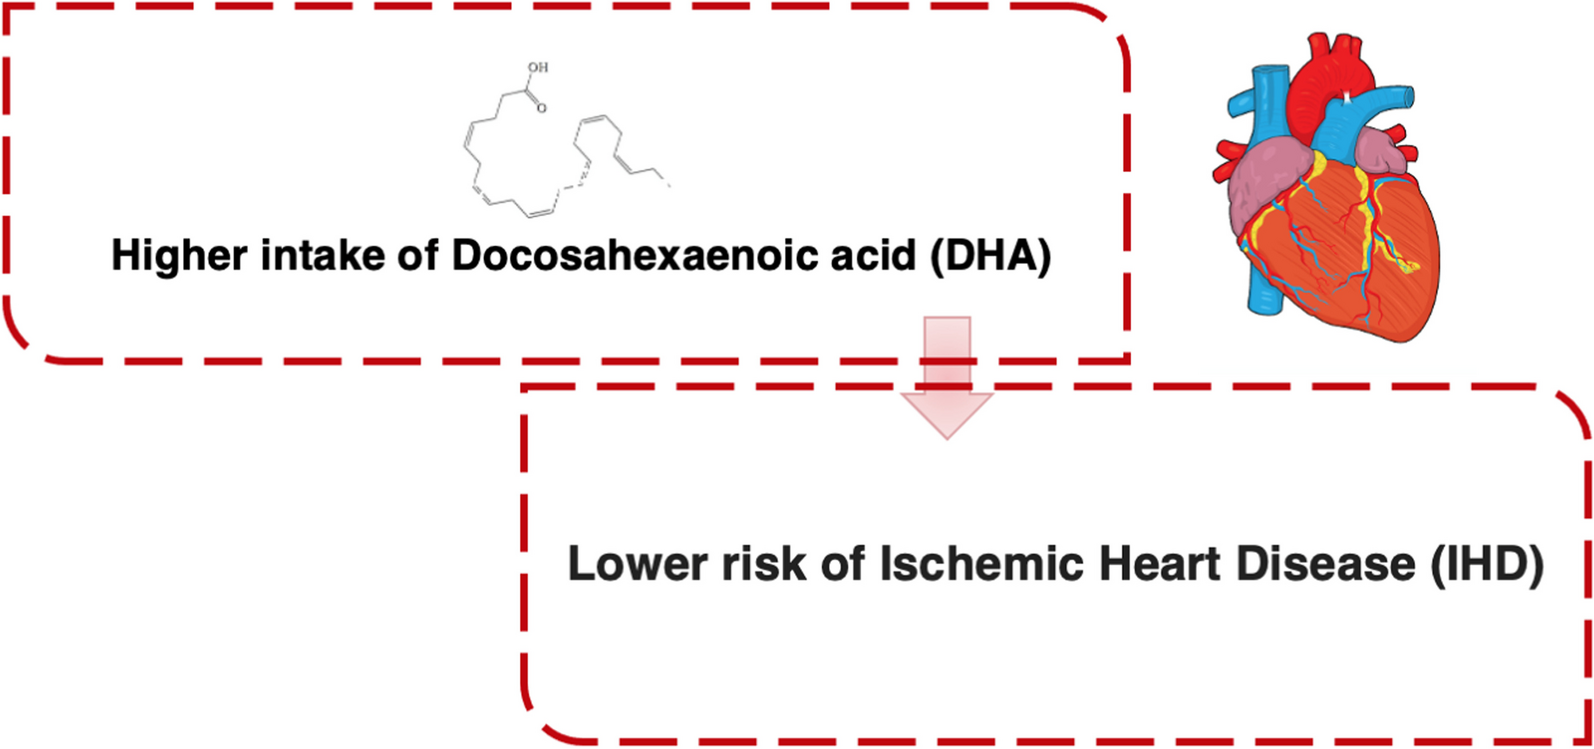 Association of dietary fats with ischemic heart disease (IHD): a case–control study